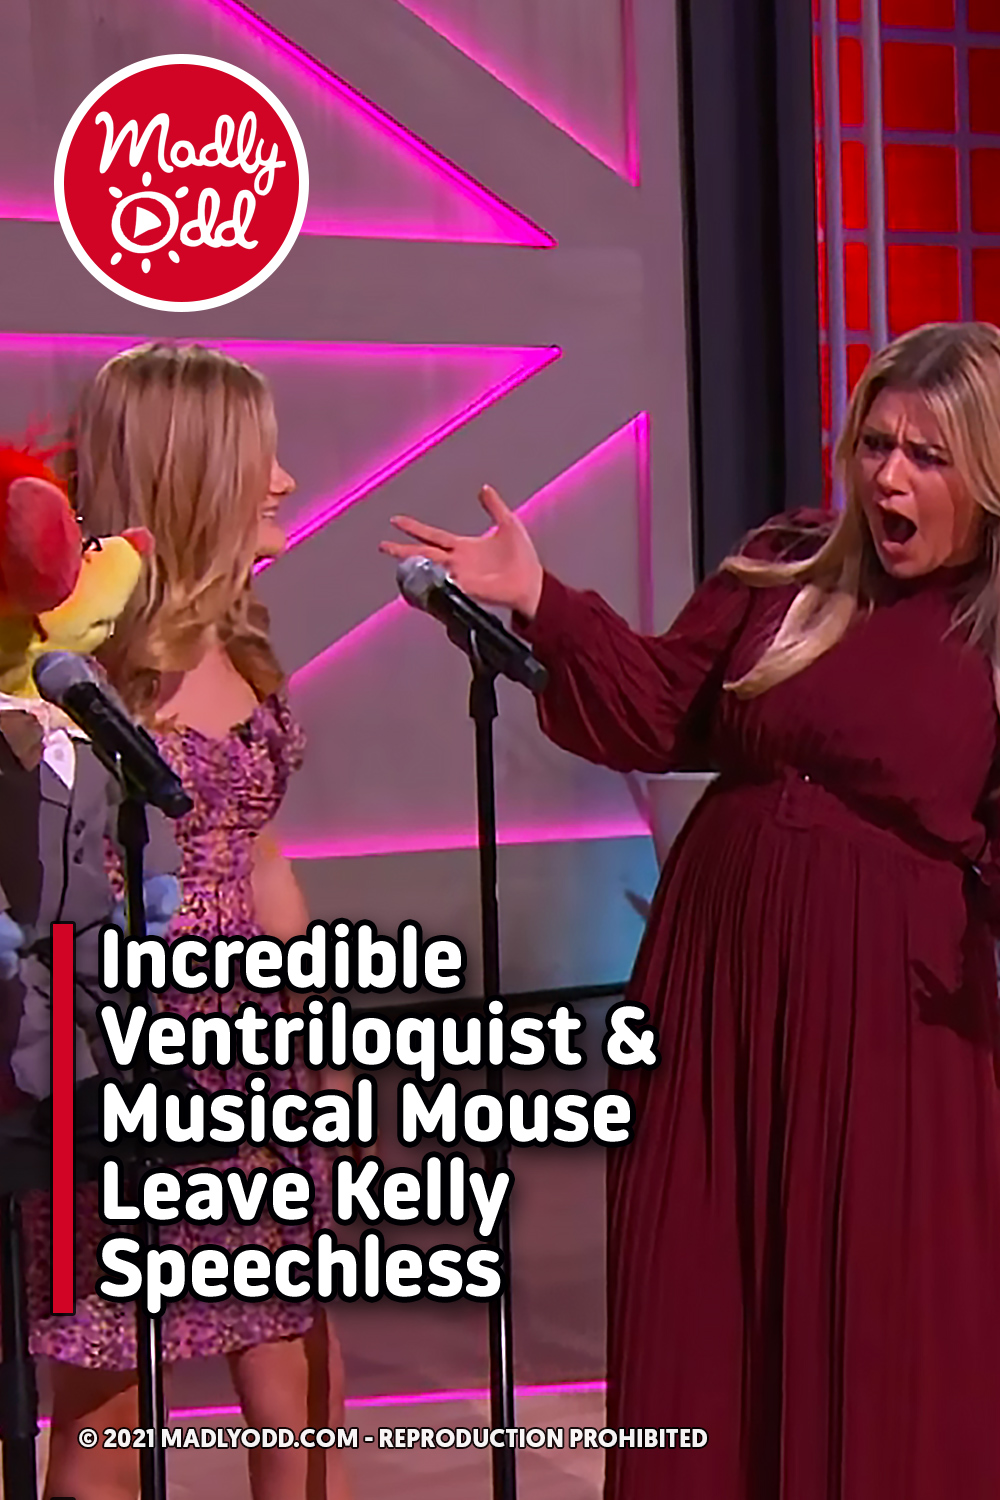 Incredible Ventriloquist & Musical Mouse Leave Kelly Speechless